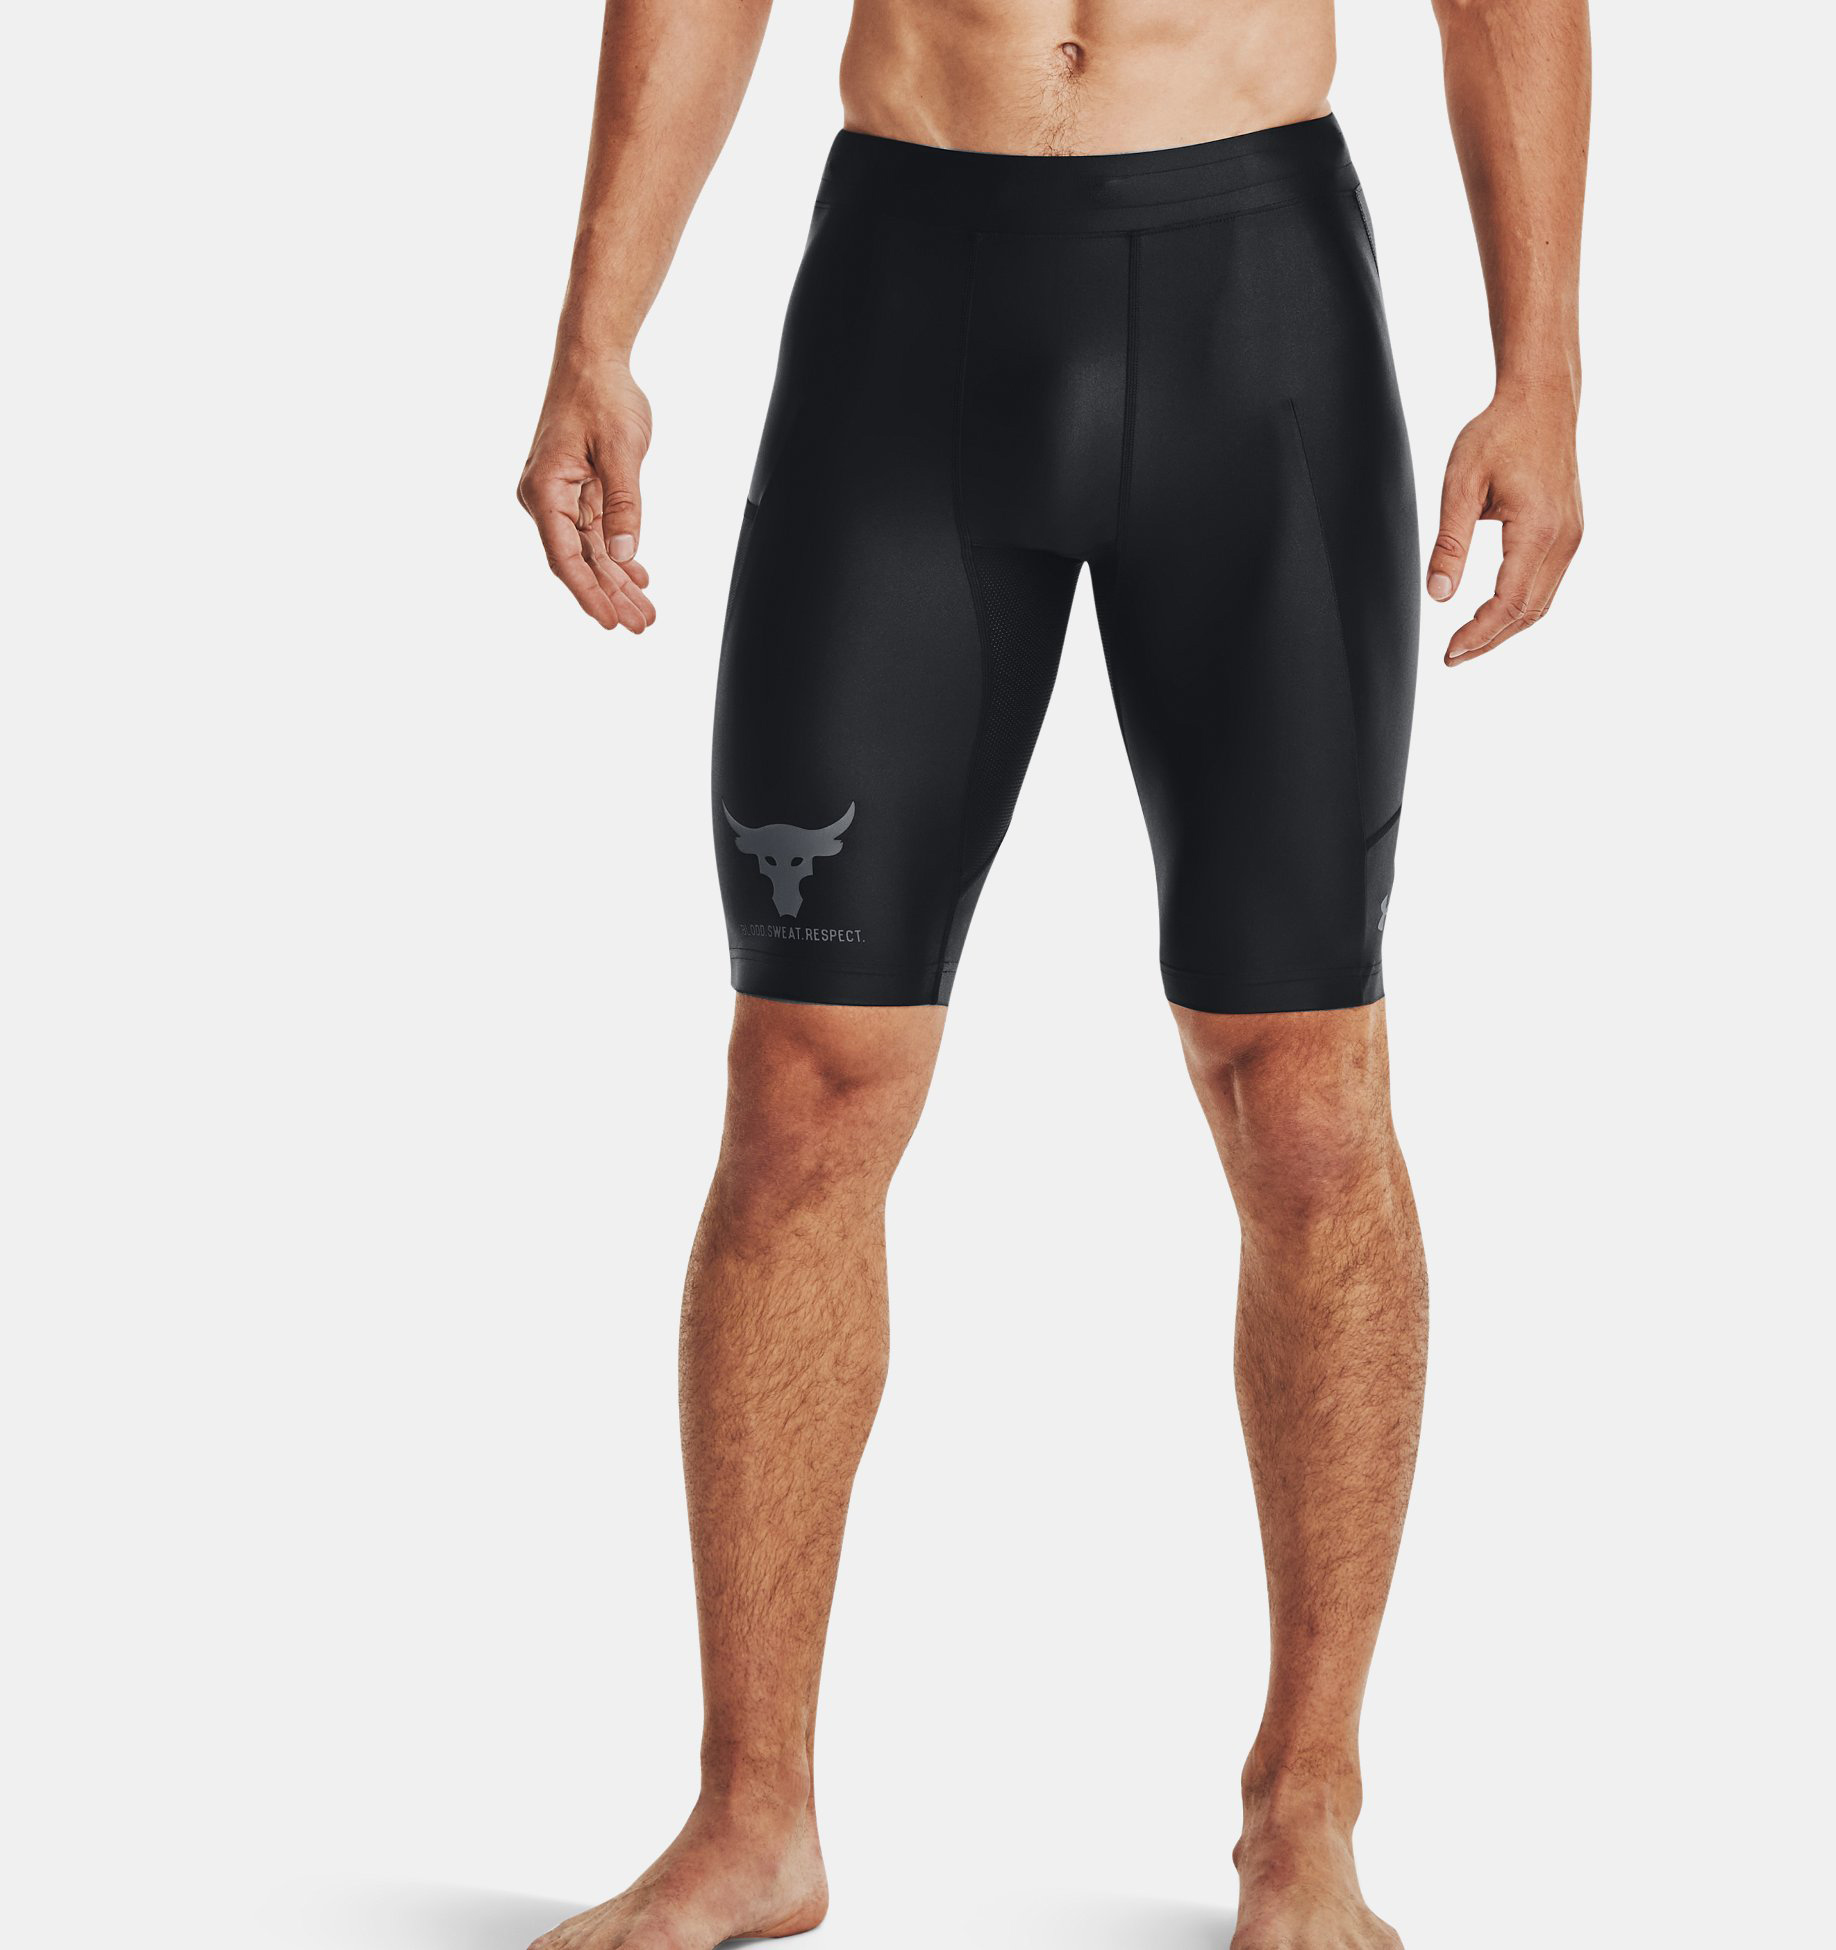 project-rock-iron-paradise-compression-shorts